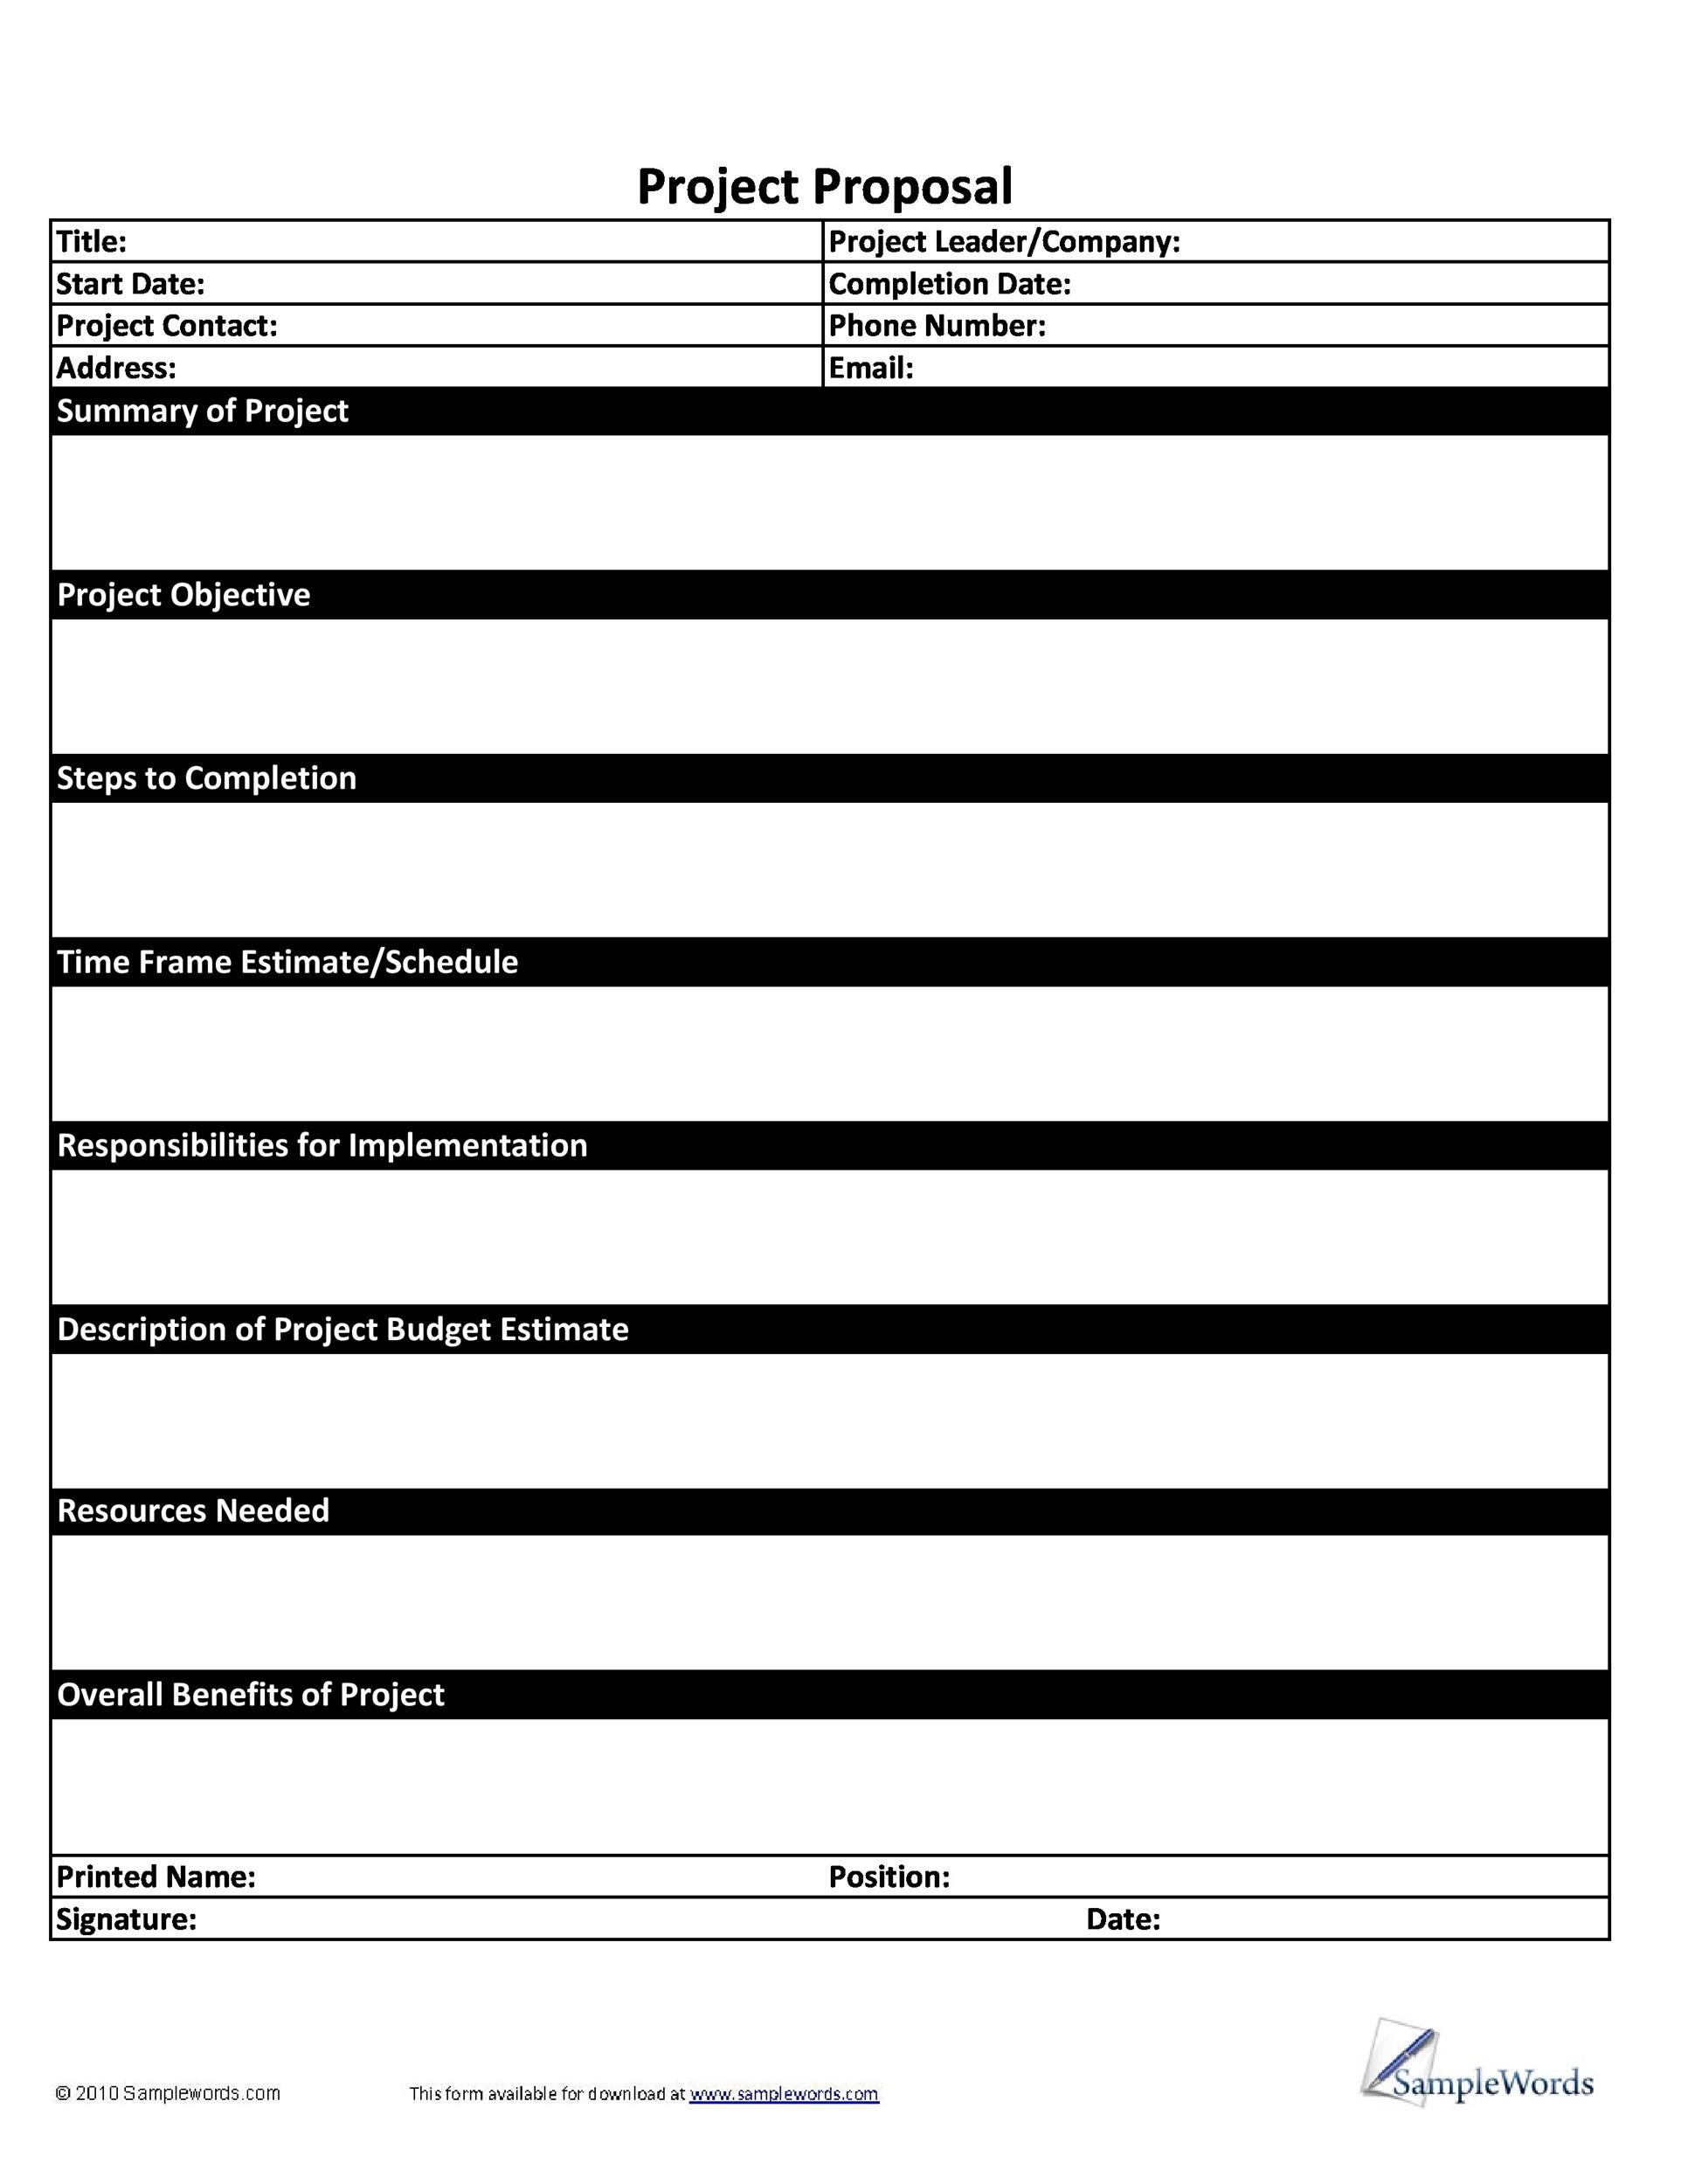 Printable Project Proposal Template